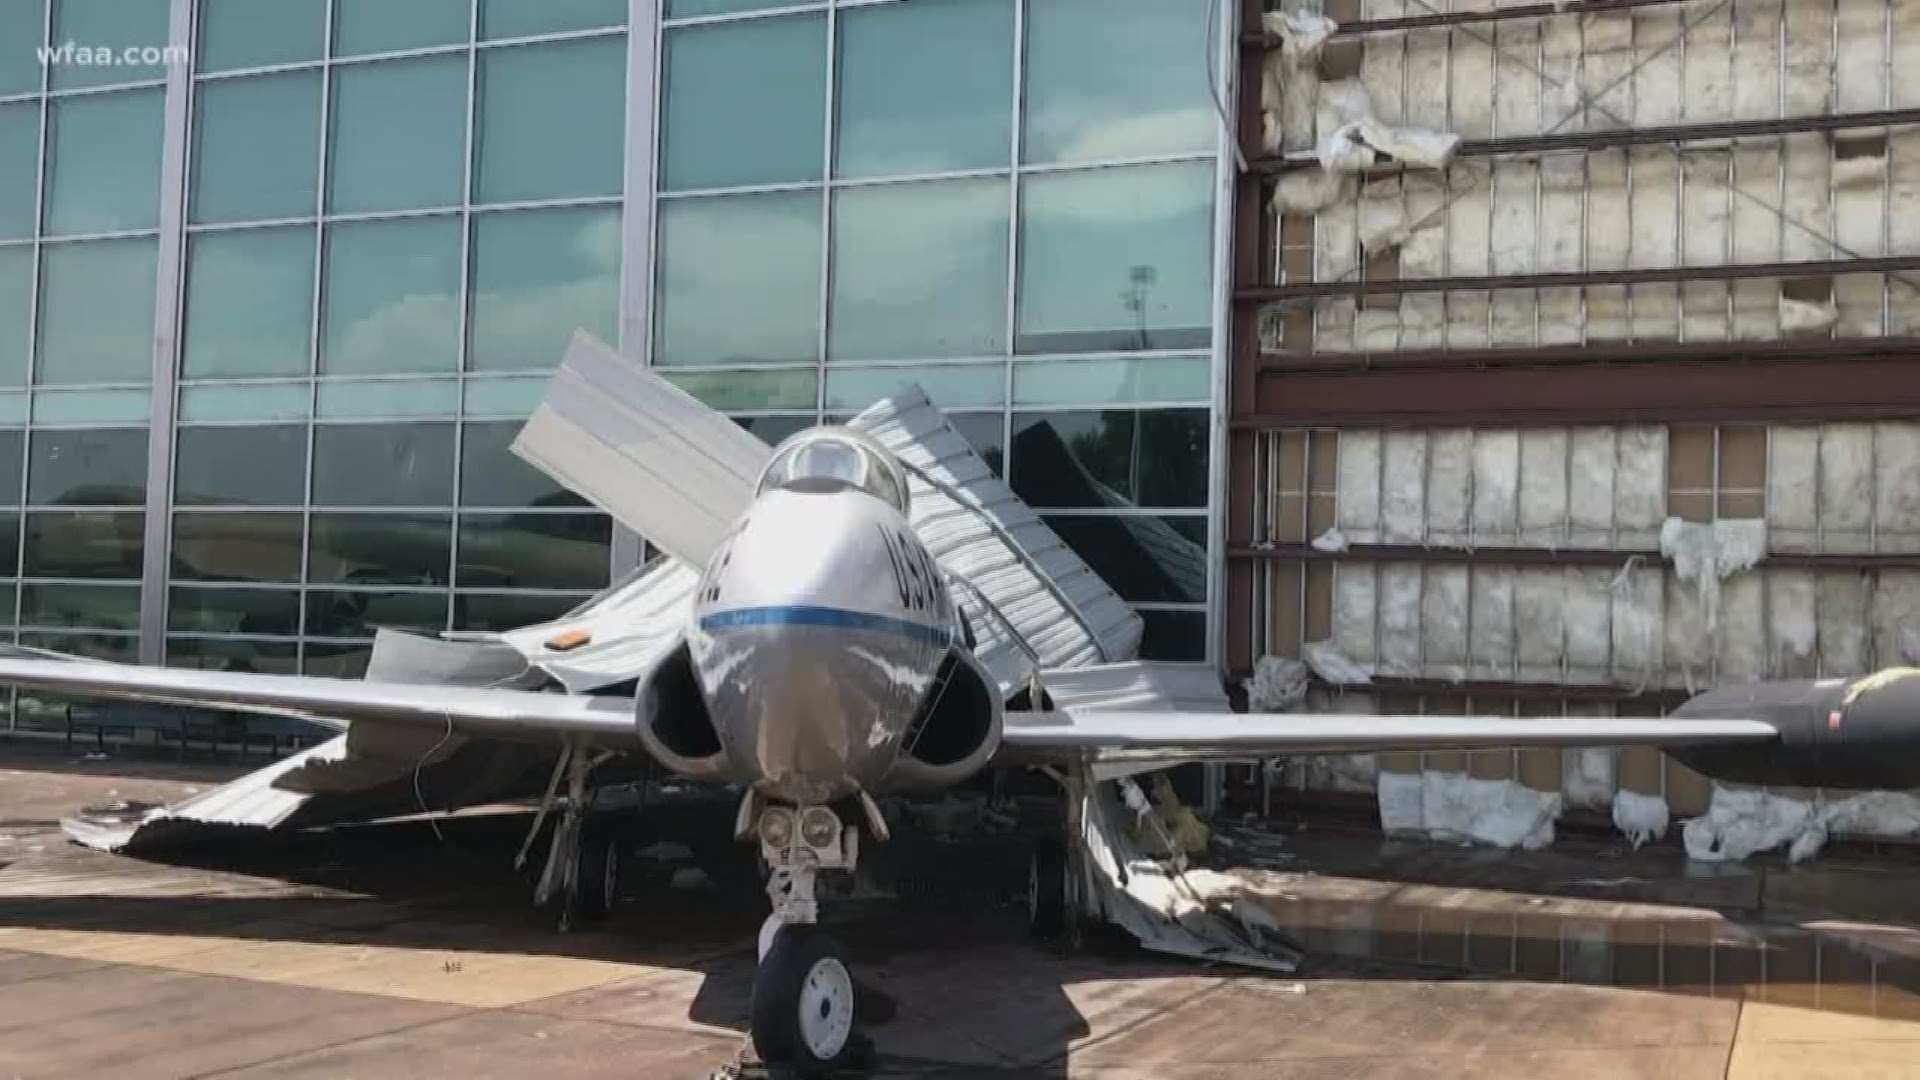 After multiple wild storms, two aviation museums are out nearly $100,000.